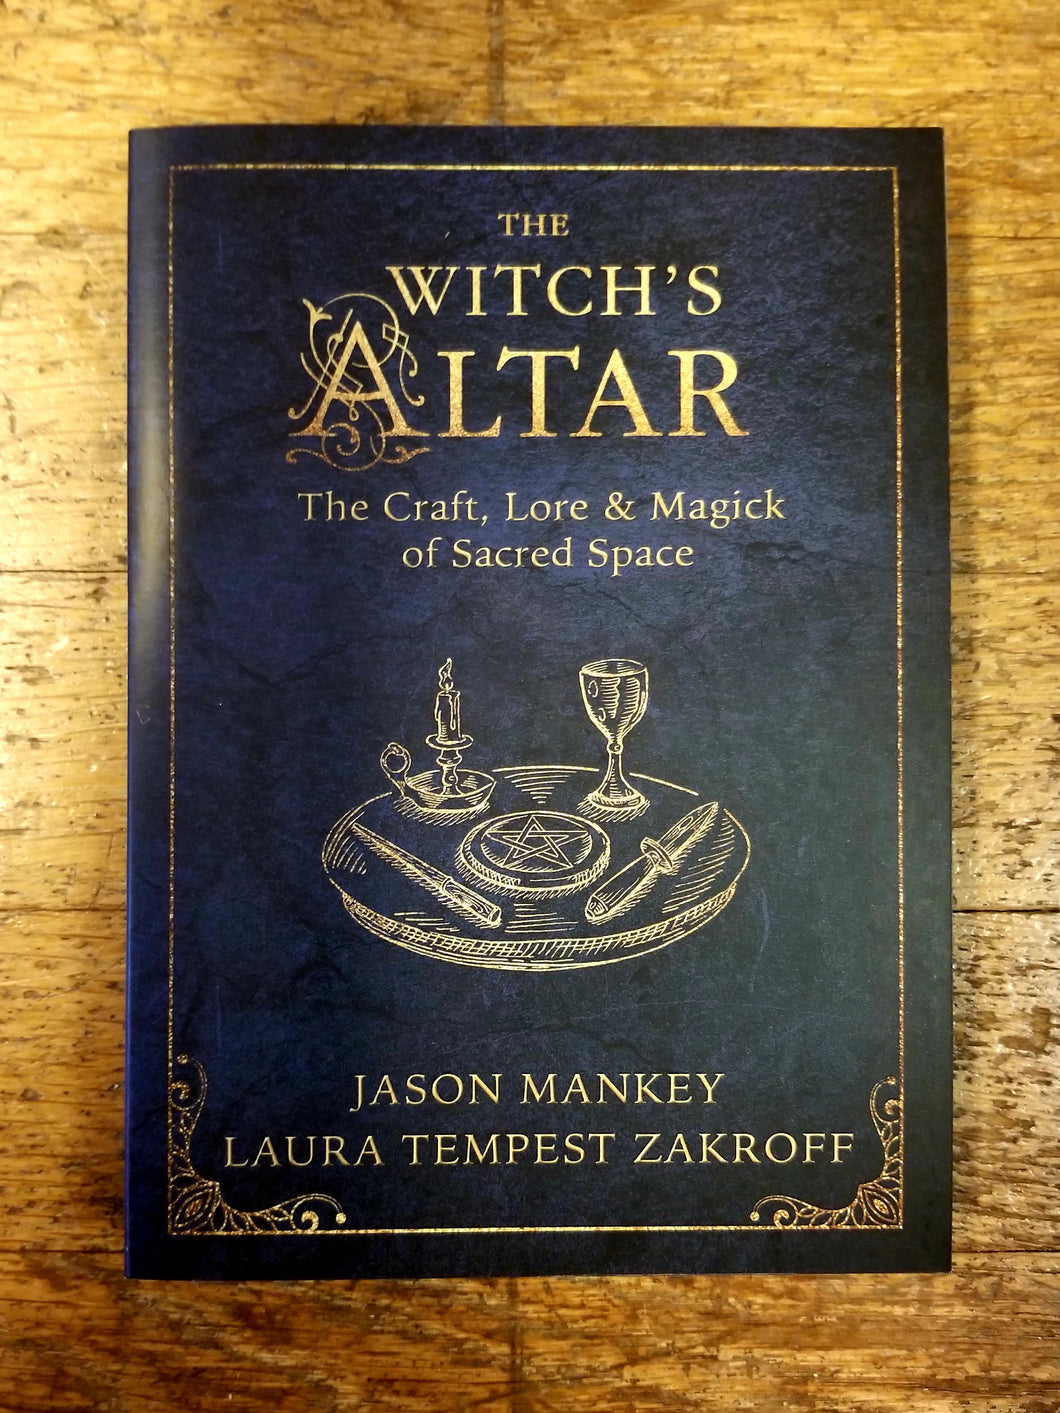 The Witch's Altar: The Craft, Lore & Magick of Sacred Space by Jason Mankey and Laura Tempest Zakroff